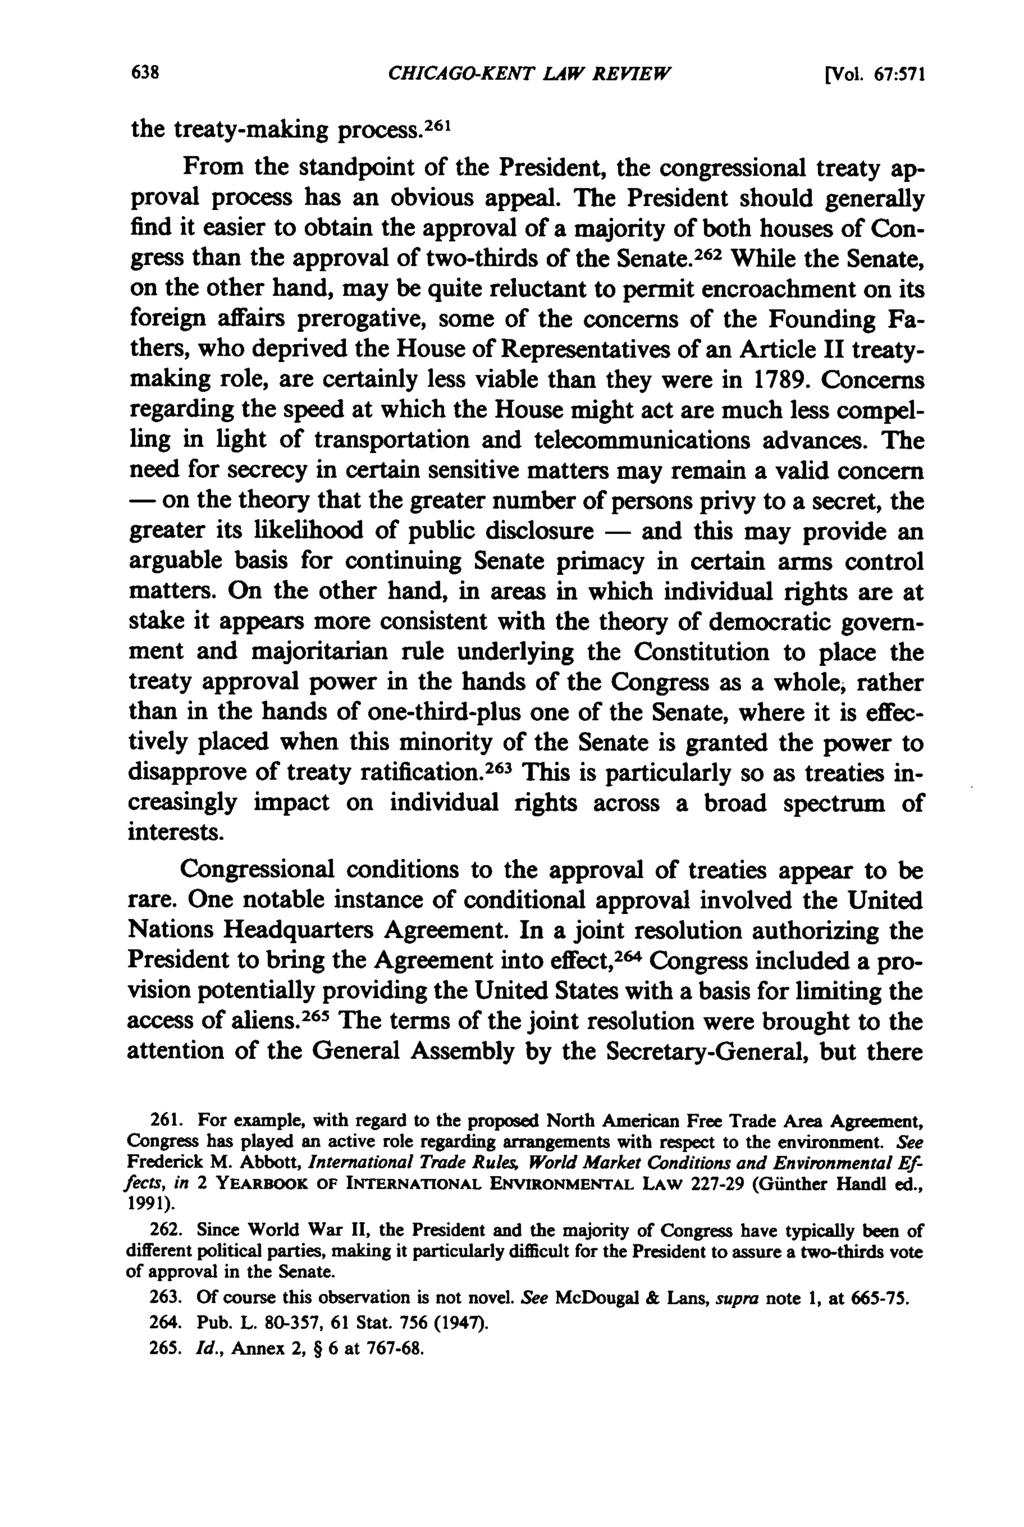 CHICAGO-KENT LAW REVIEW [Vol. 67:571 the treaty-making process. 261 From the standpoint of the President, the congressional treaty approval process has an obvious appeal.